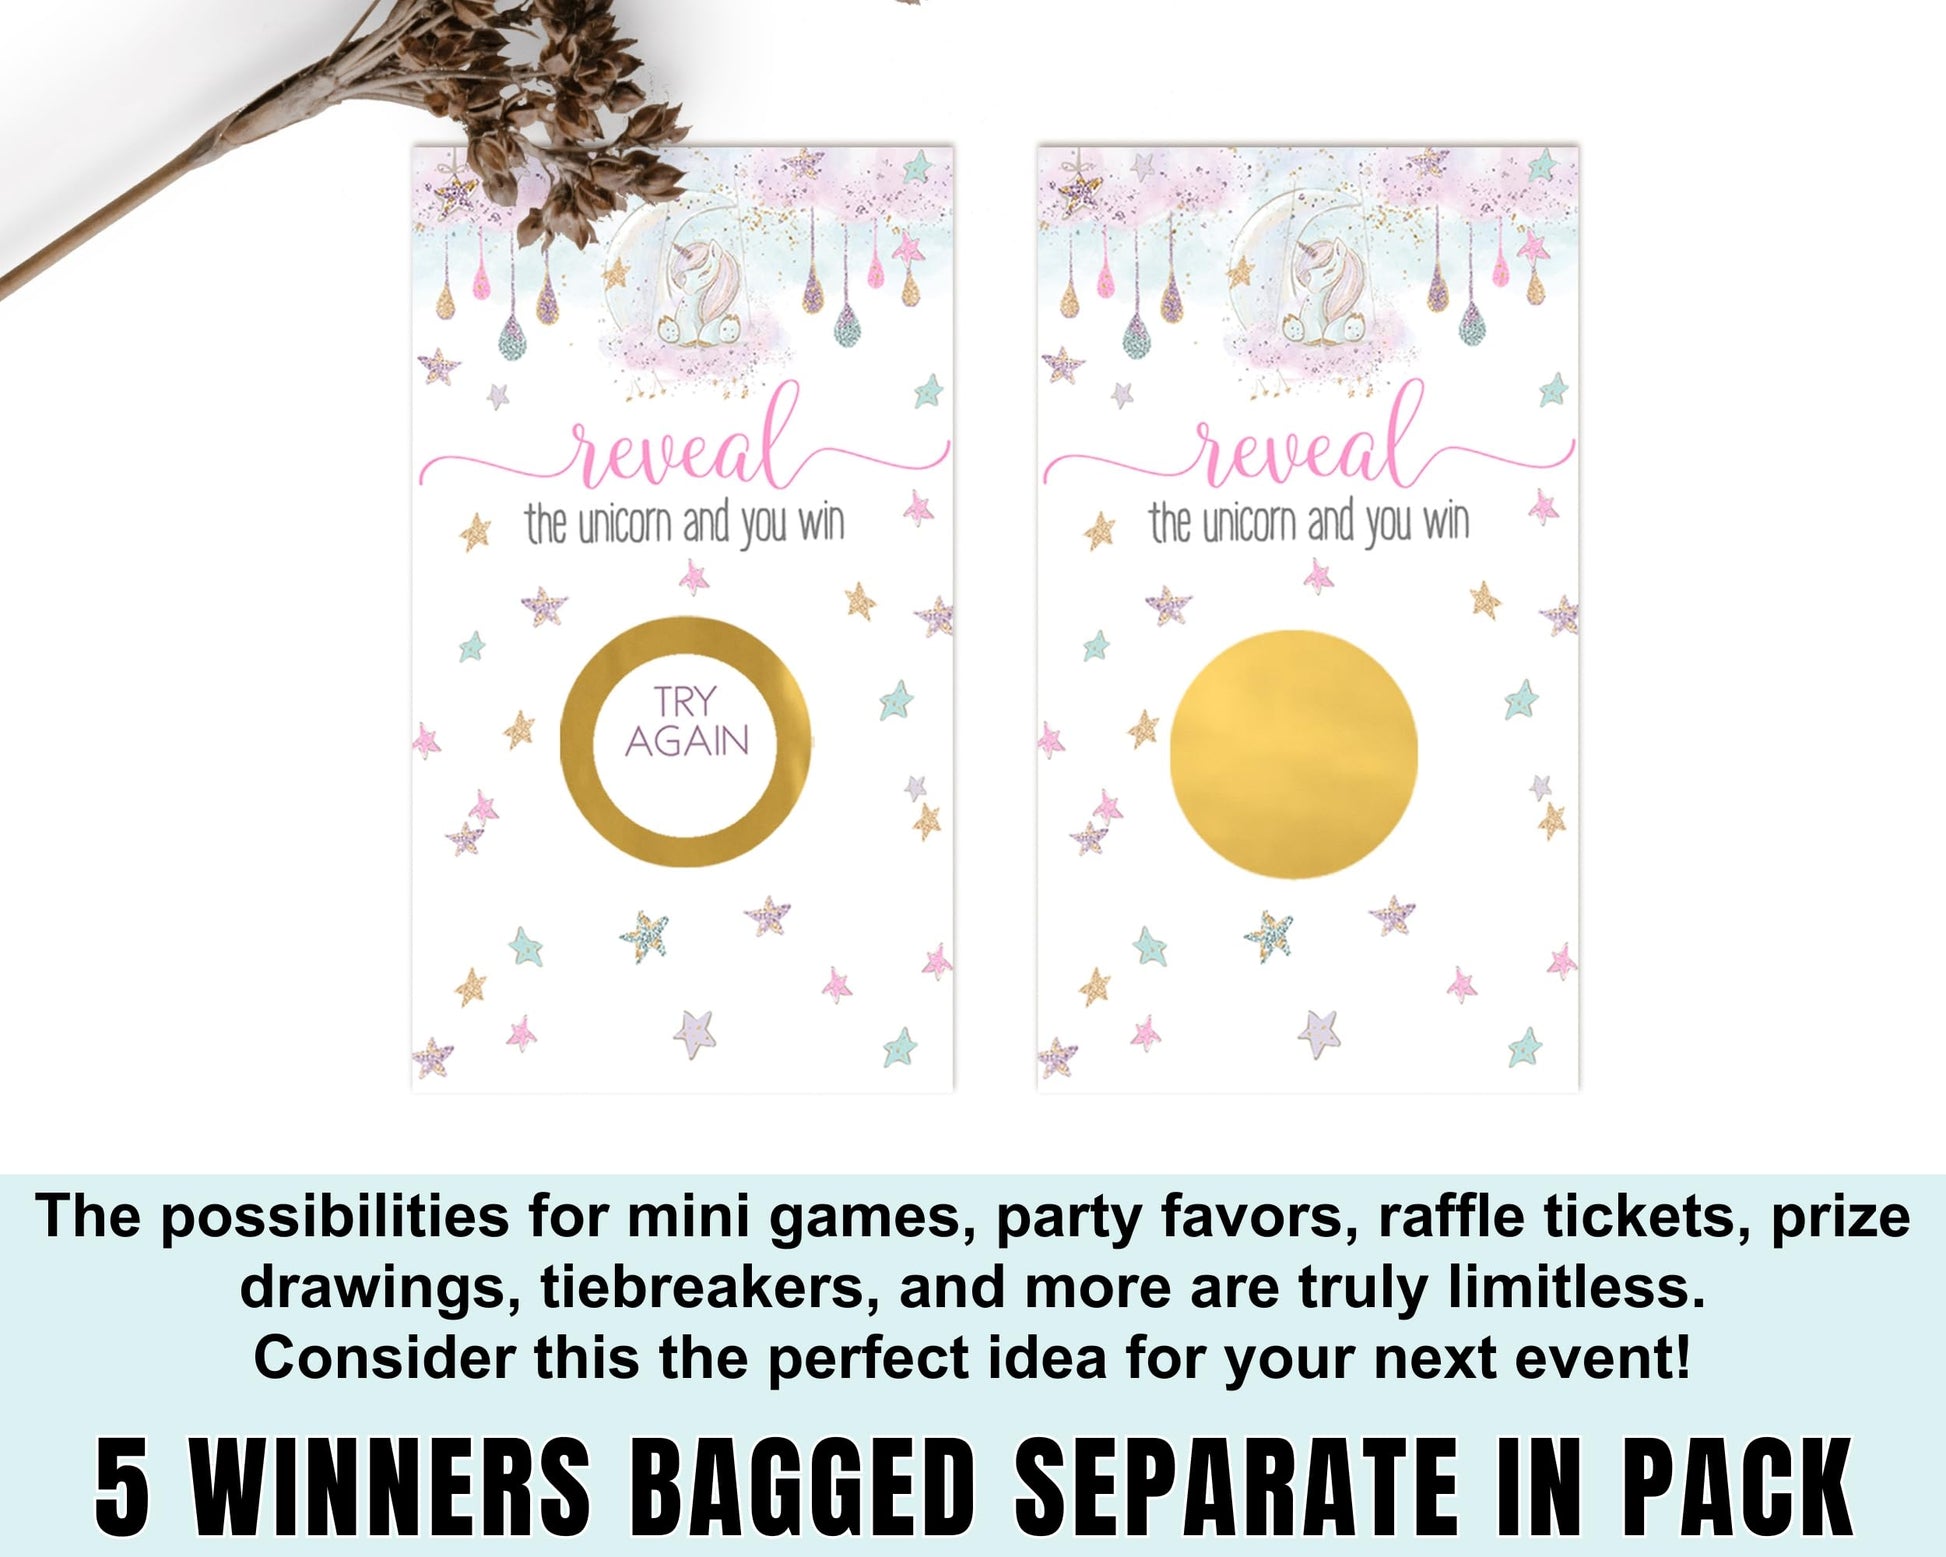 Girls Baby Shower Prize Drawings Scratcher Tickets Birthday Activities, MoonPaper Clever Party